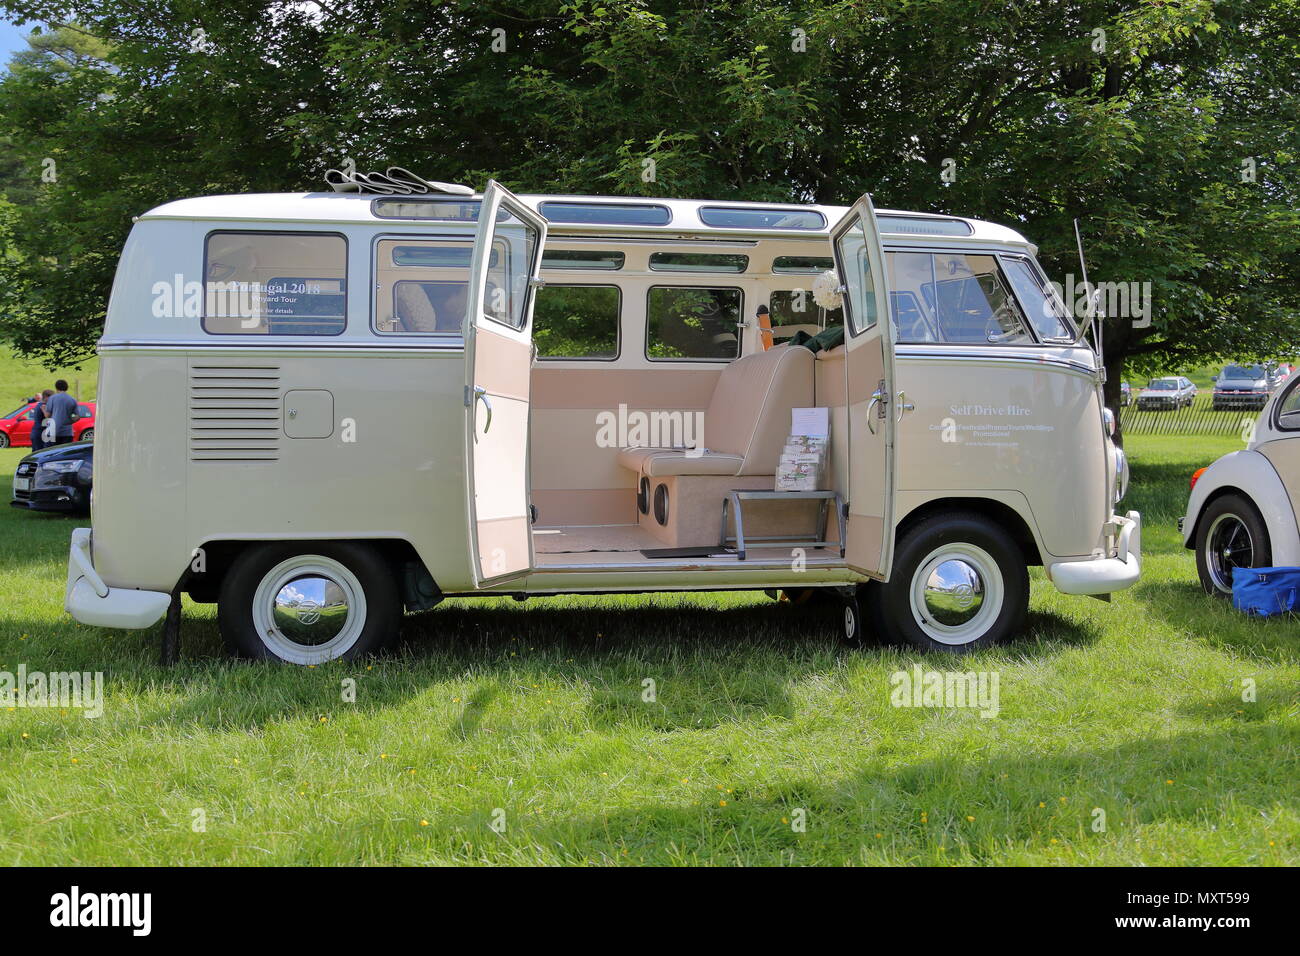 All types of historic Volkswagen cars and vans were displayed at this years's gathering of their owners. Fans could get close to well-loved vehicles. Stock Photo